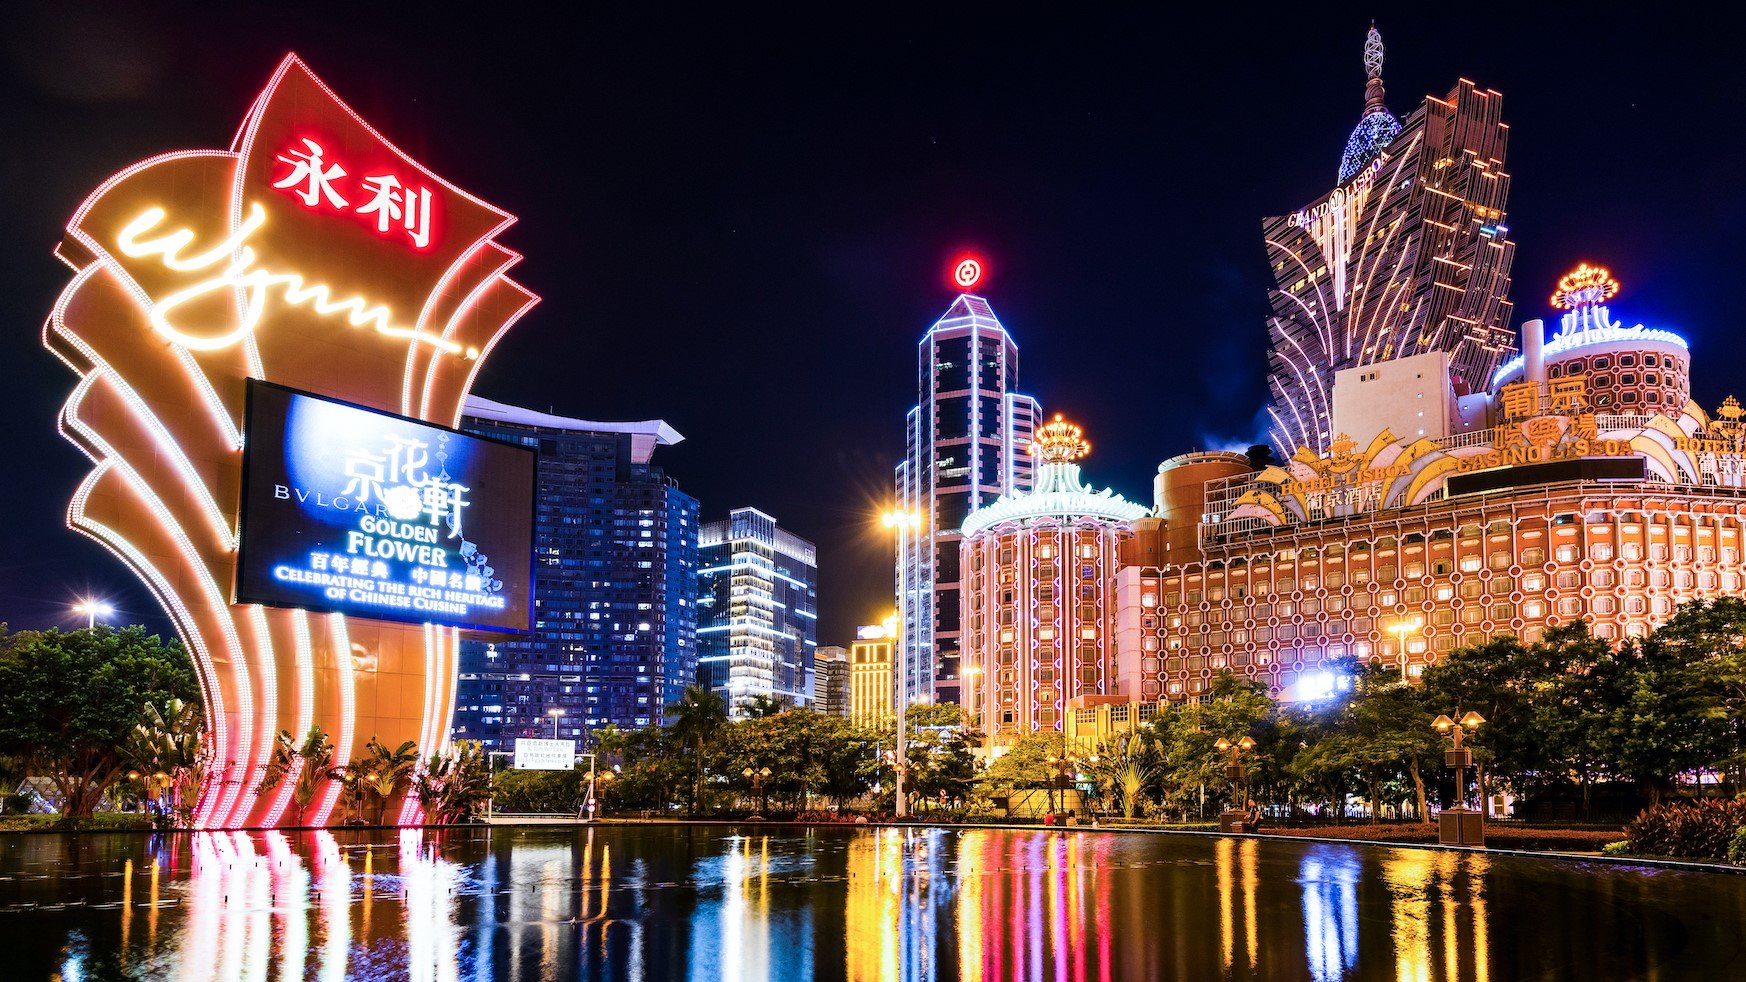 Macau’s casino losses exceed B mark in H1 as they await bidding process; recovery not expected until 2023